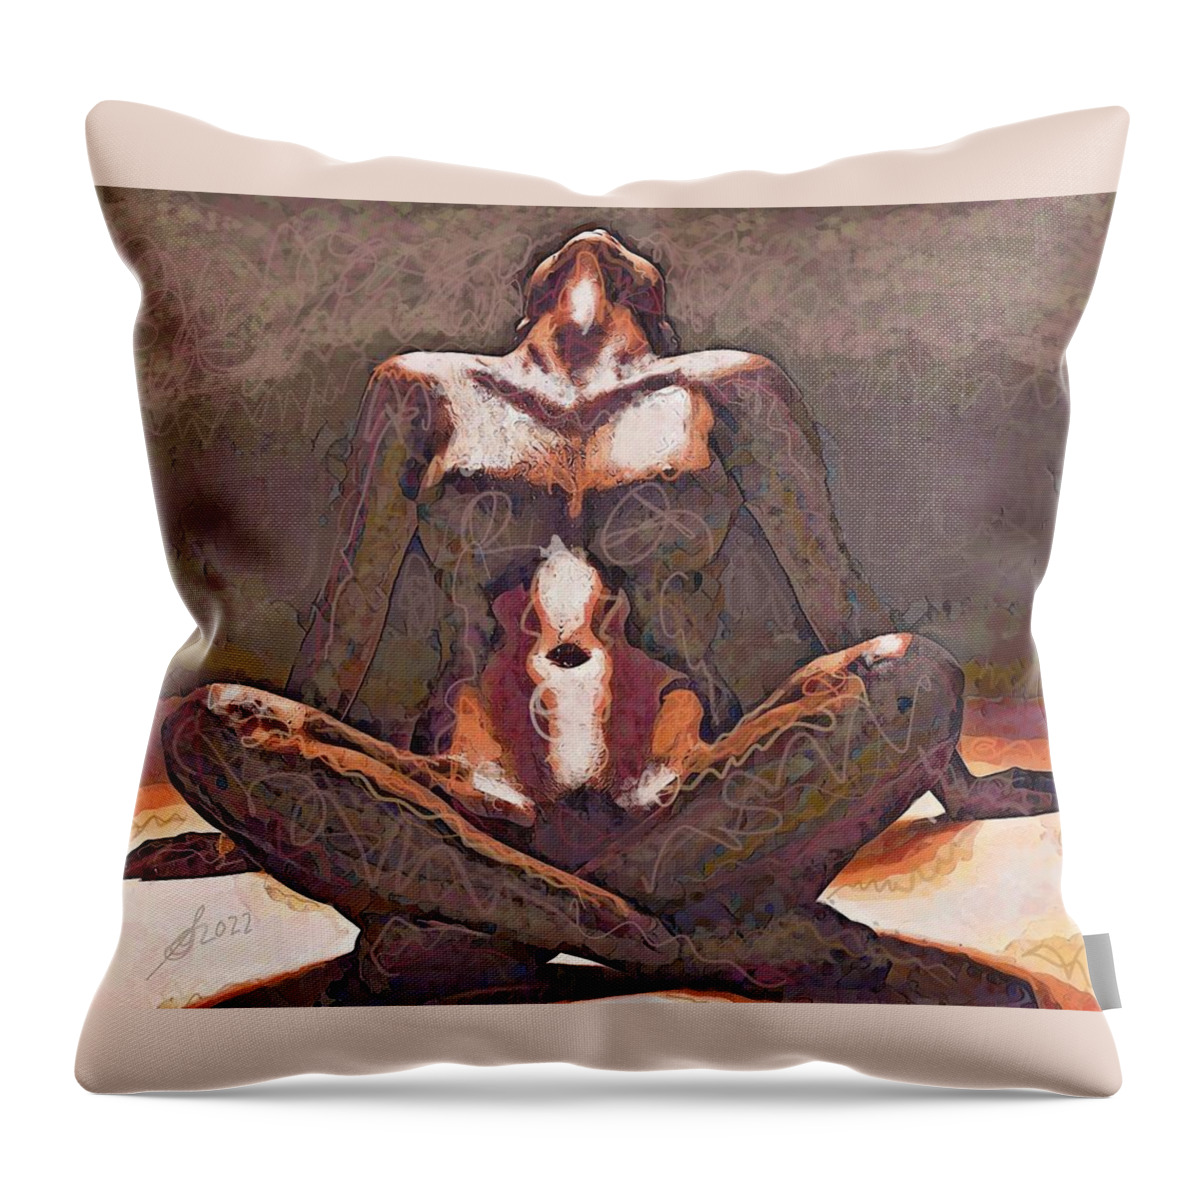 Nude Throw Pillow featuring the painting Enlightenment by Sol Luckman